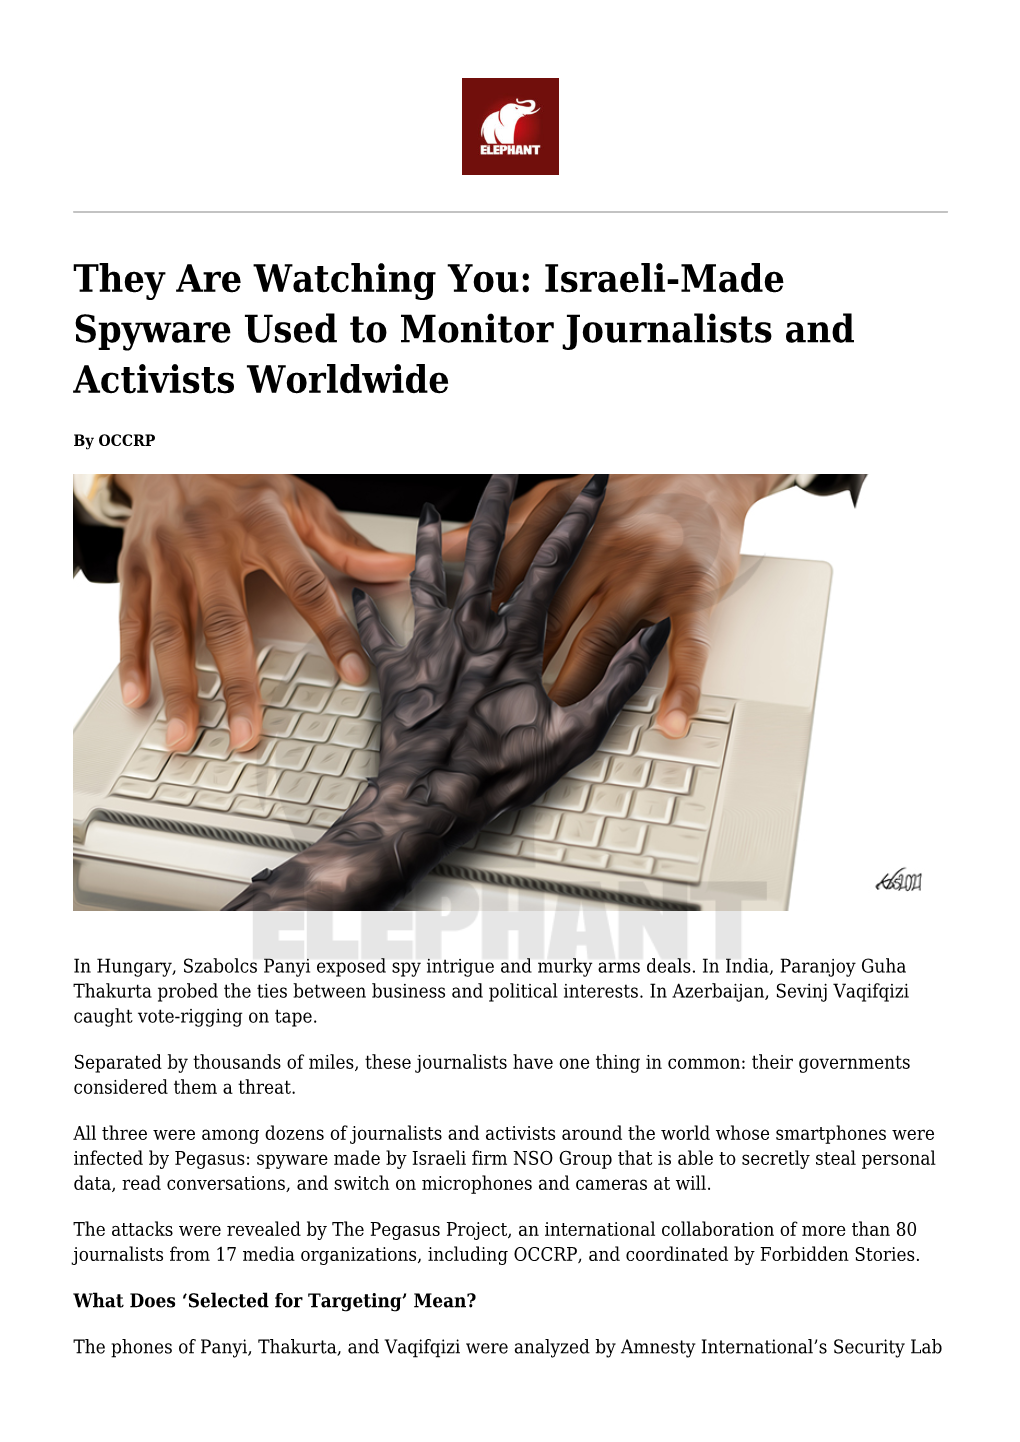 Israeli-Made Spyware Used to Monitor Journalists and Activists Worldwide